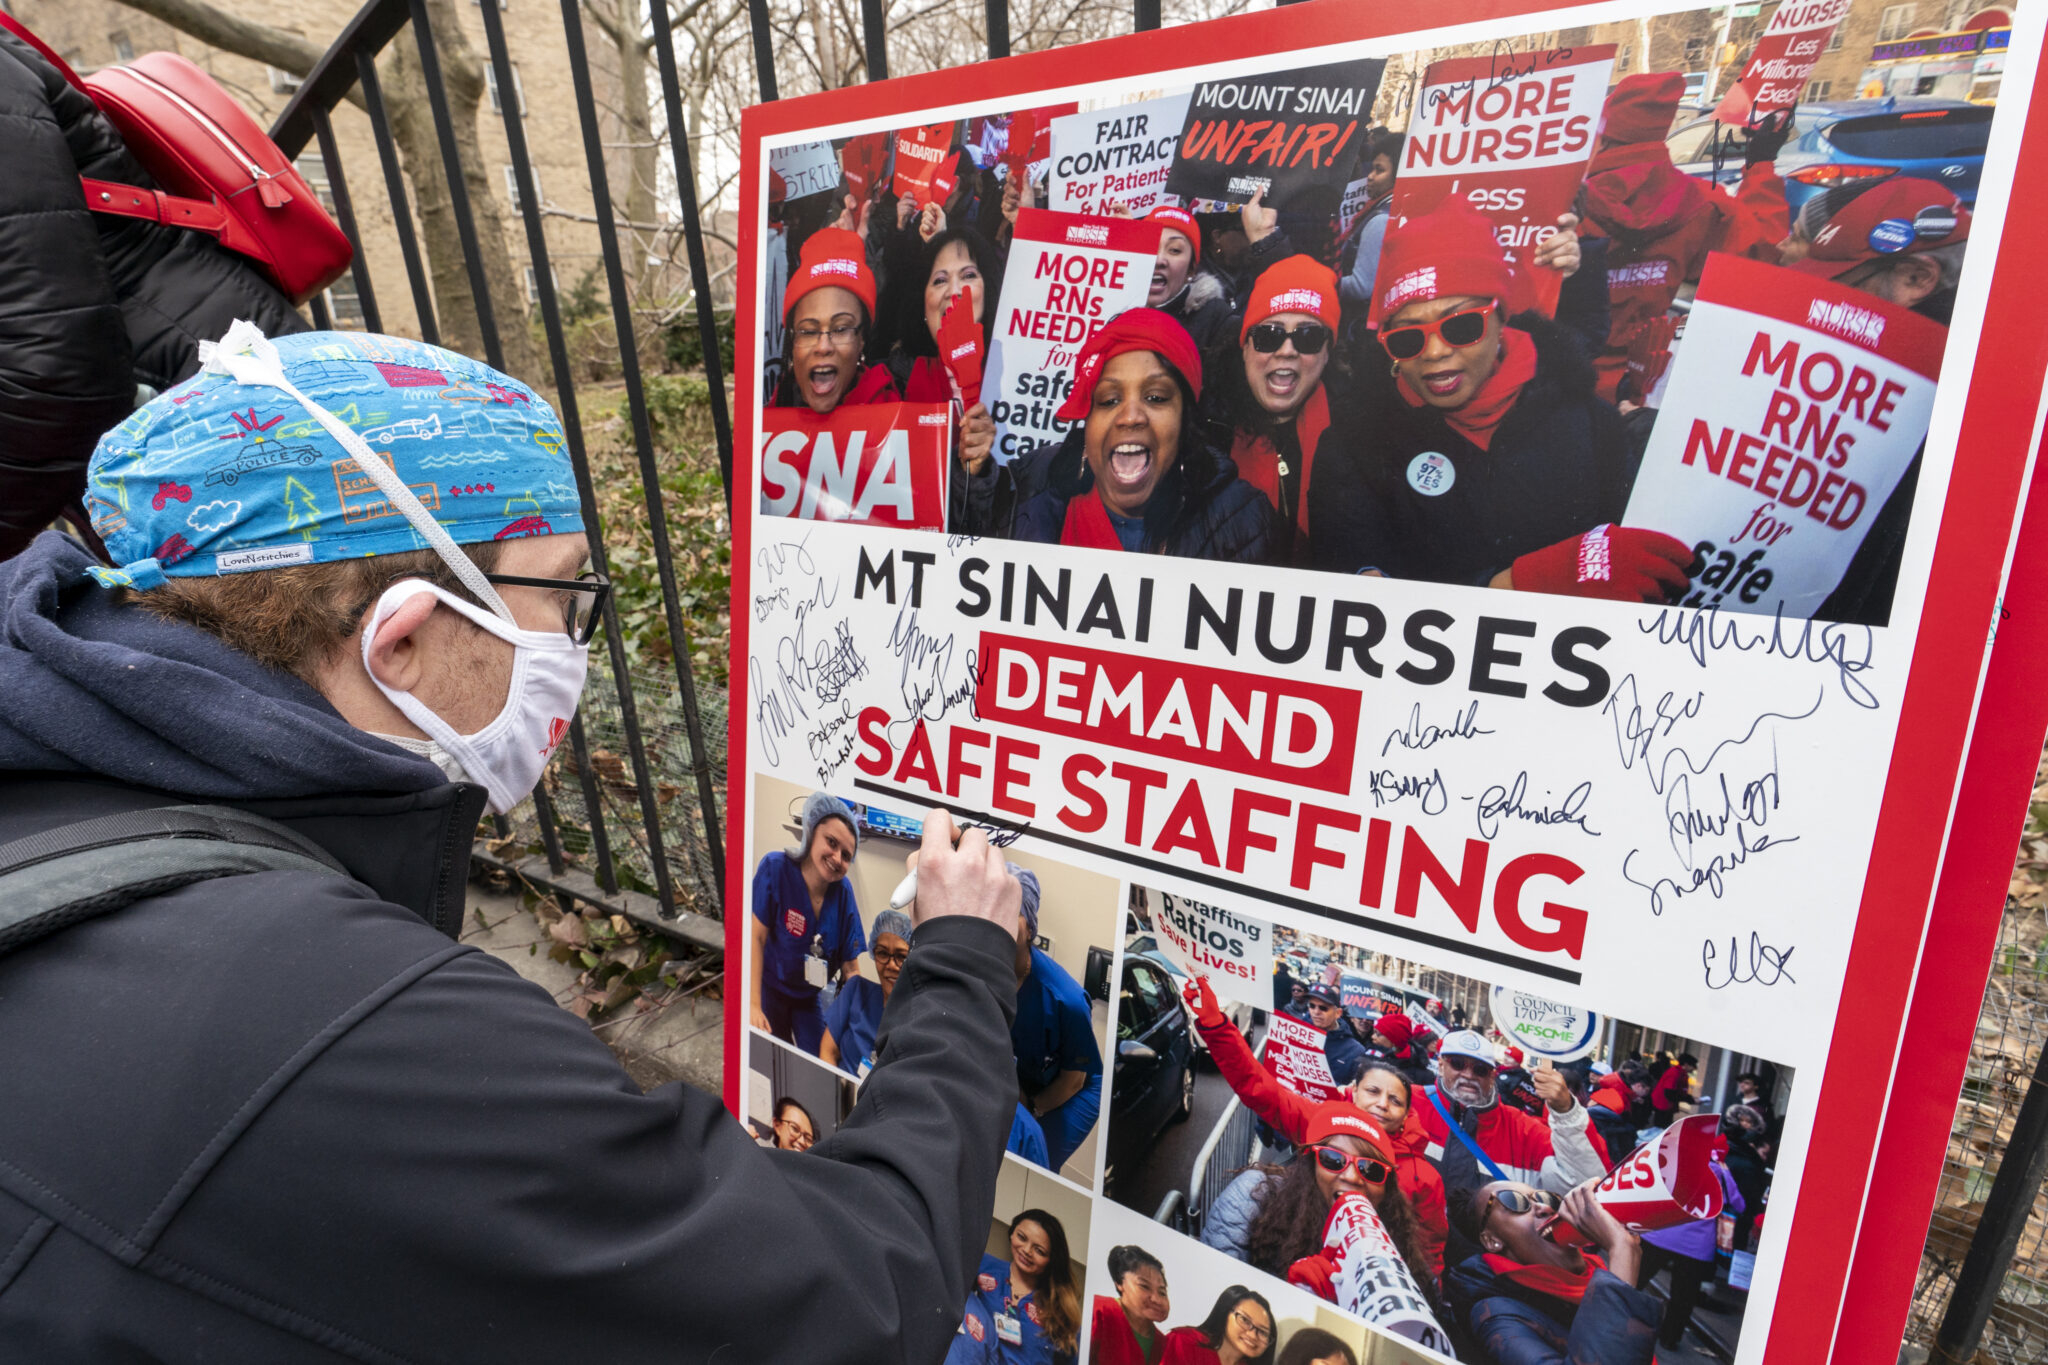 FILE - Zach Clapp, a nurse in the Pediatric Cardiac ICU at Mount Sinai Hospital signs a board demanding safe staffing during a rally by NYSNA nurses from NY Presbyterian and Mount Sinai, Tuesday, March 16, 2021, in New York. Negotiations to keep 10,000 New York City nurses from walking off the job headed Friday, Jna. 6, 2023, into a final weekend as some major hospitals braced for a potential strike by sending ambulances elsewhere and transferring such patients as vulnerable newborns.  (AP Photo/Mary Altaffer, File)